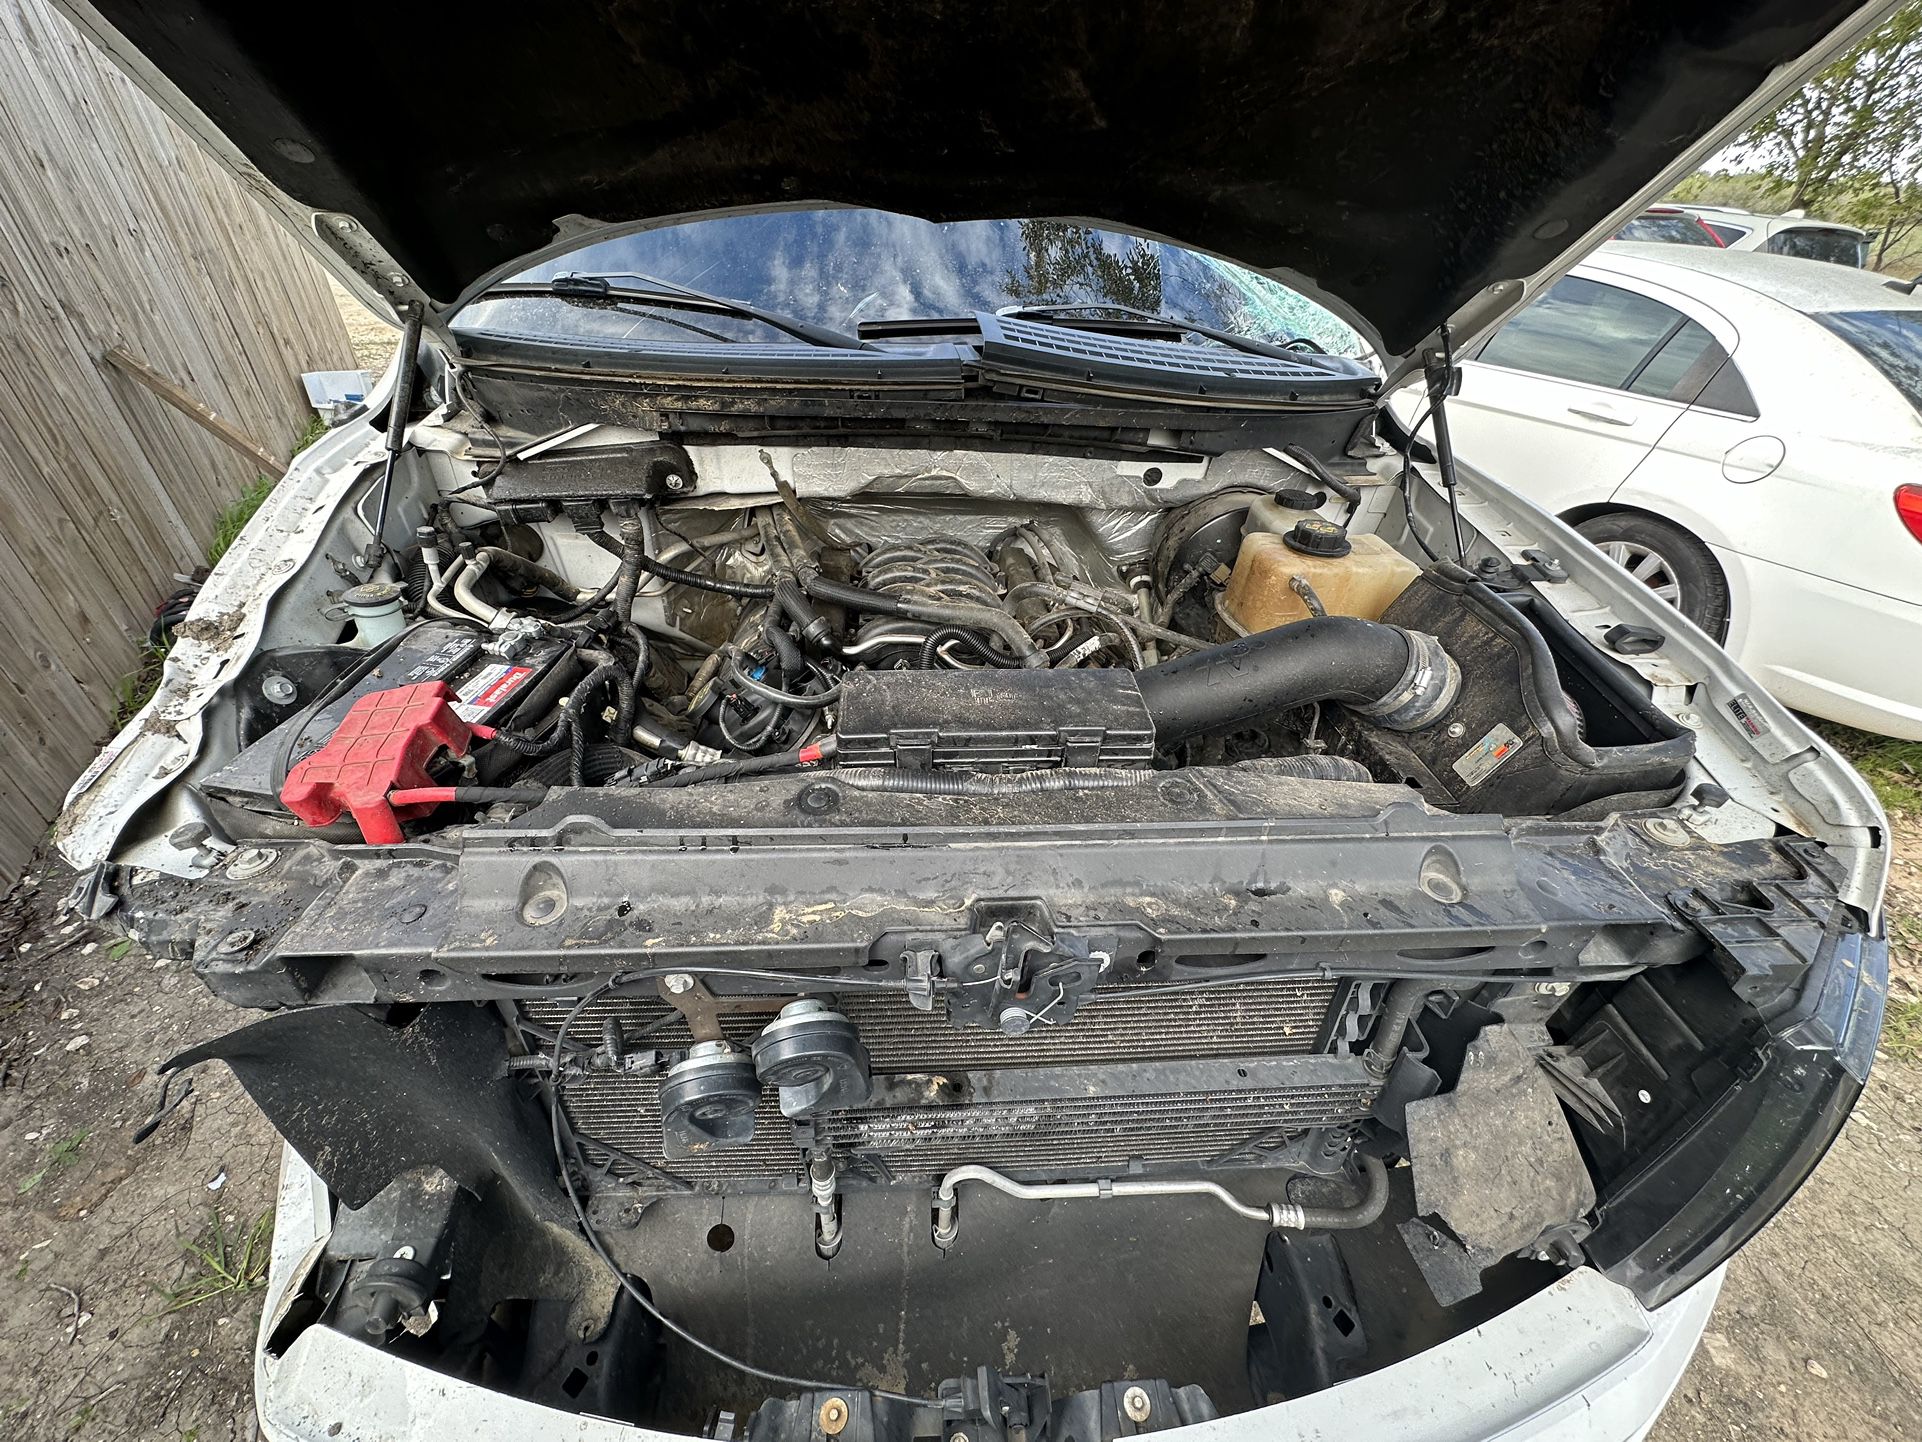 Ford 150 5.0 Engine And Parts For Sale 